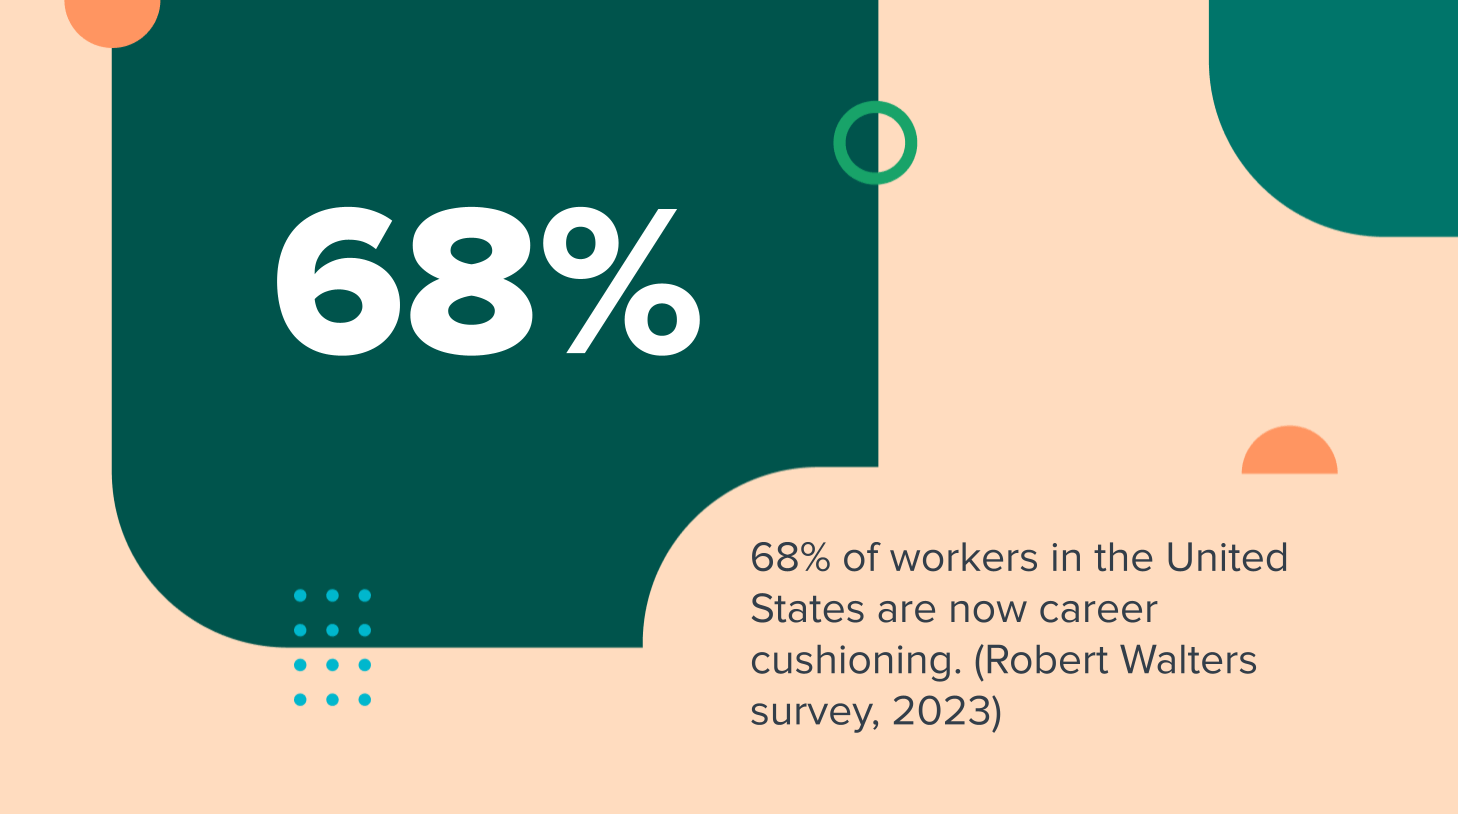 68% of workers in the United States are now career cushioning. (Robert Walters survey, 2023)
